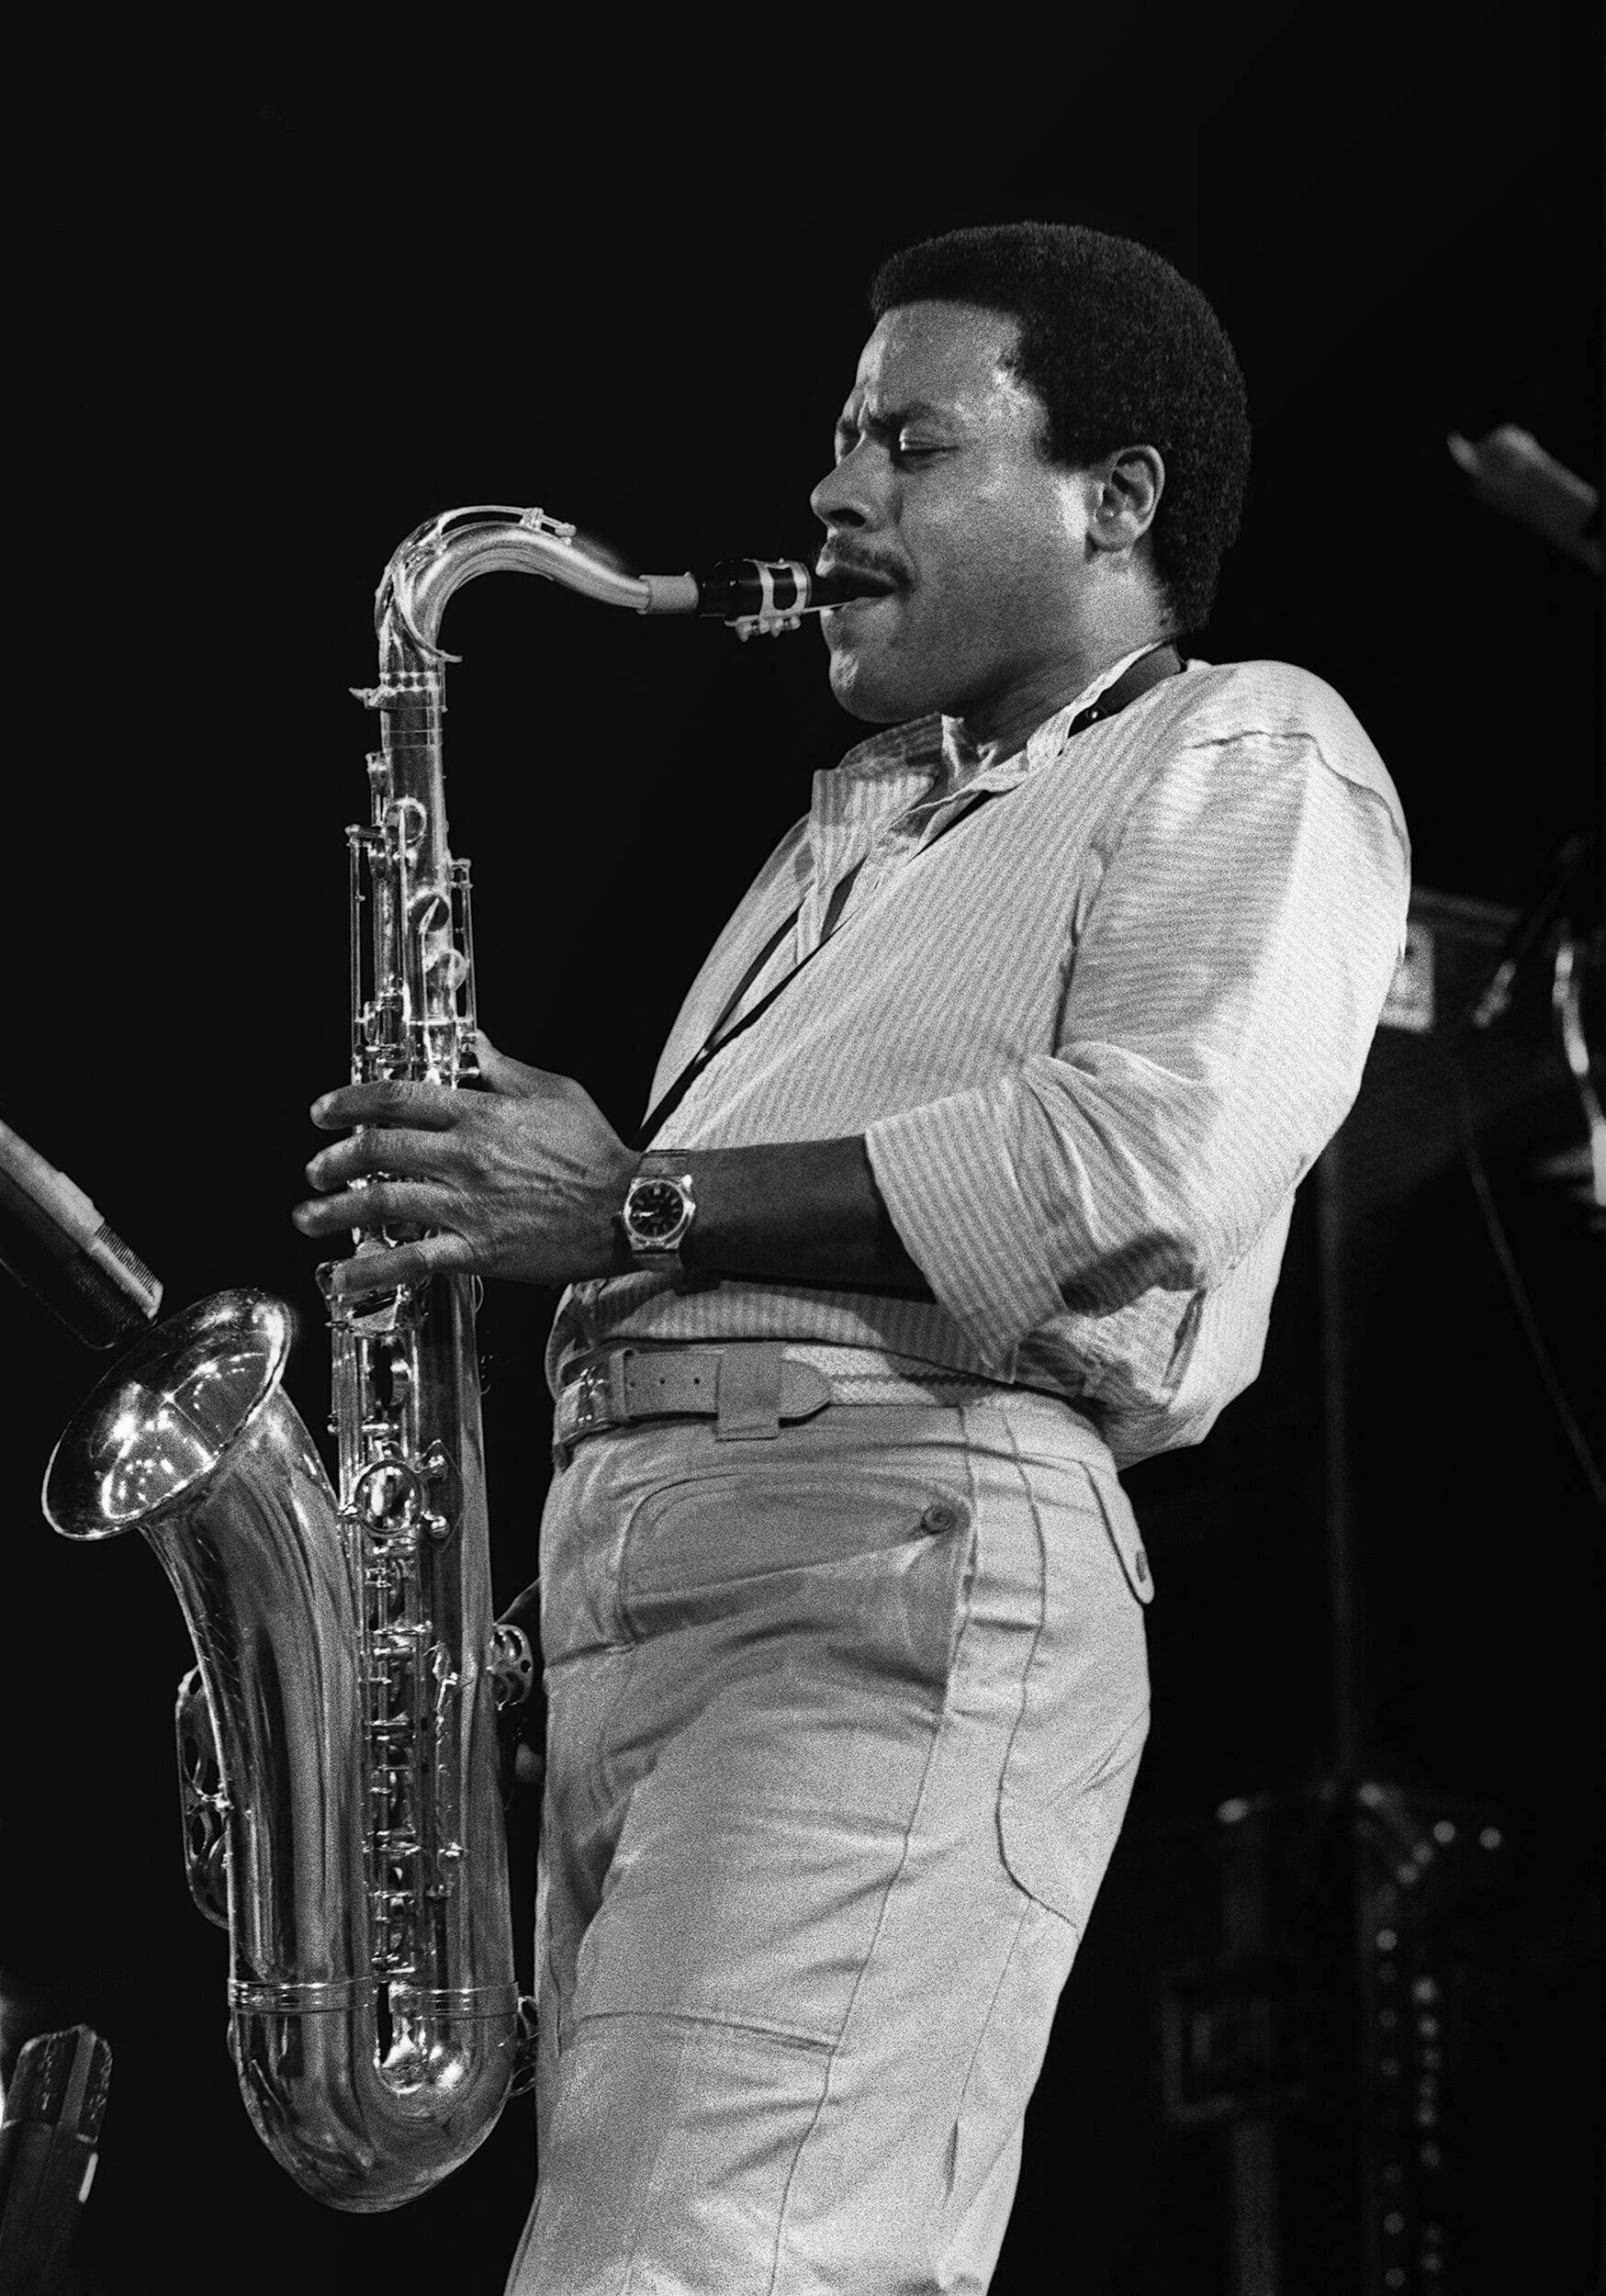 U.S. jazz saxophone player Wayne Shorter, leader of the Jazz rock band Weather Report, plays on July 18, 1984 during the 25th Jazz Festival in Juan-les-Pins. (Eric Gaillard/AFP via Getty Images)